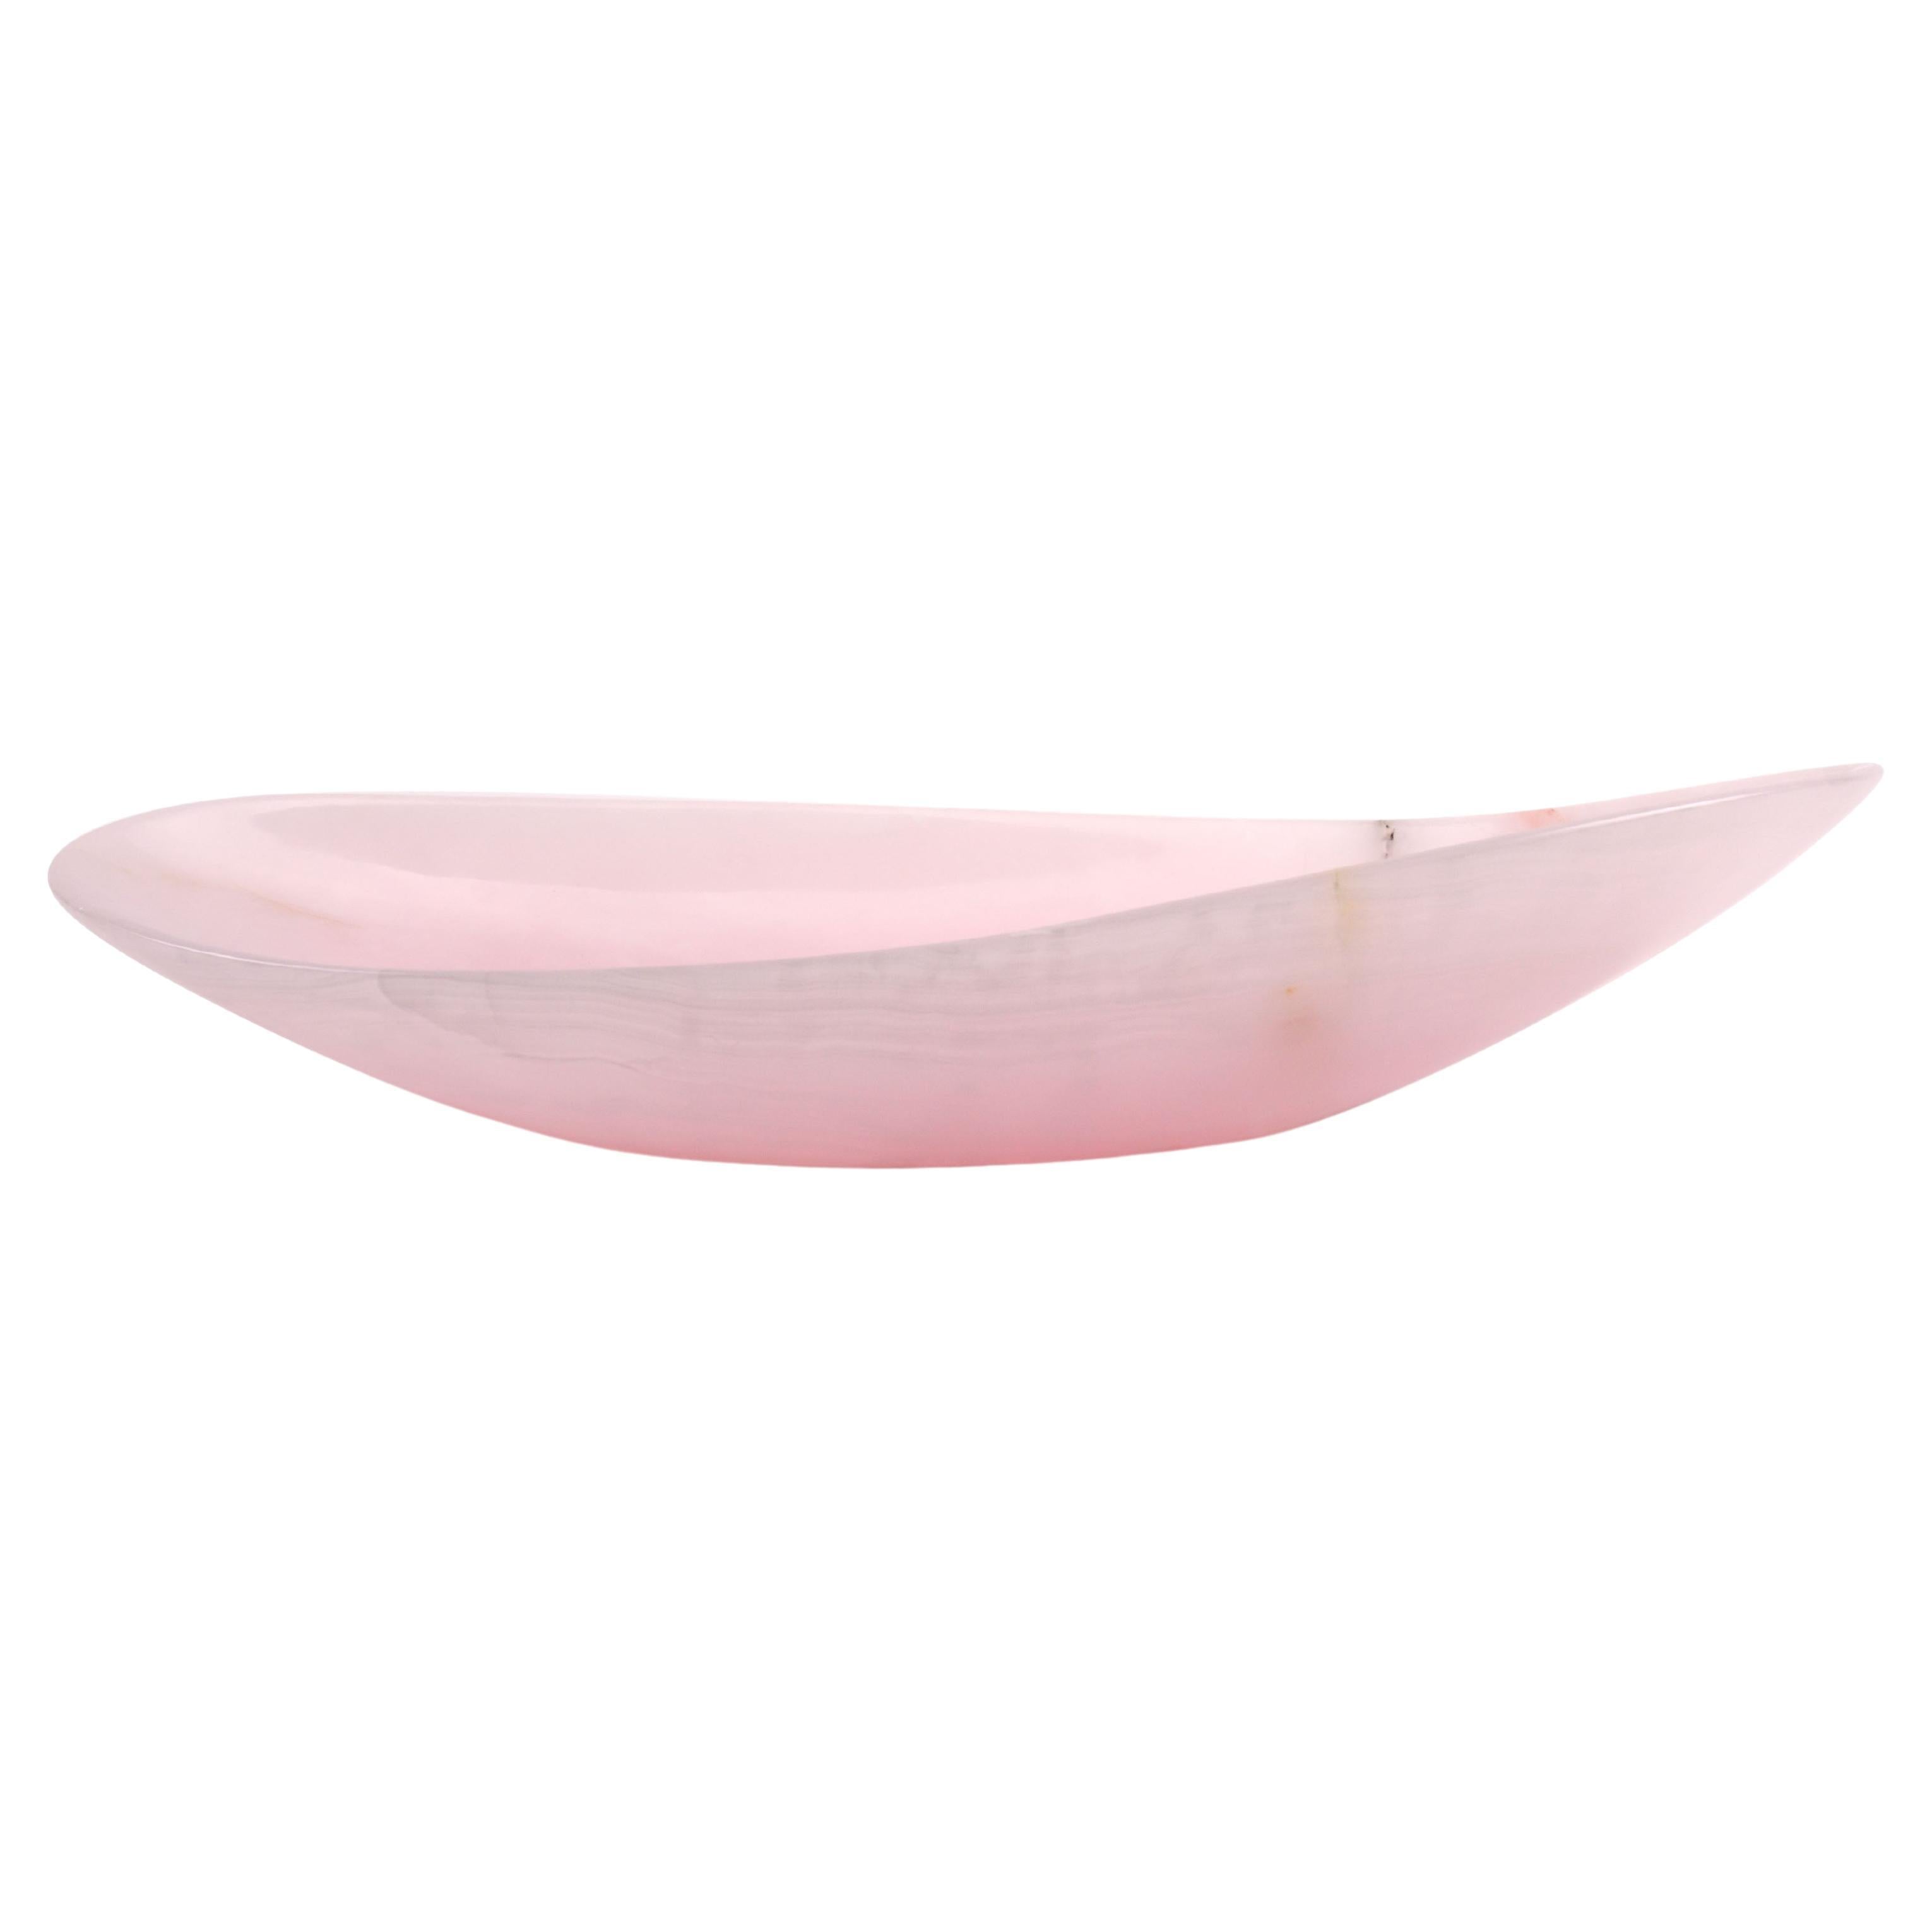 Bowl sculpted by hand from a solid block of Pink onyx. The polished finishing underlines the transparency of the onyx making this a very precious object. 

Bowl dimensions: Medium L 45 x W 22 x H 10 cm. 
Also available: Small L35 x W 17 x H8 cm and